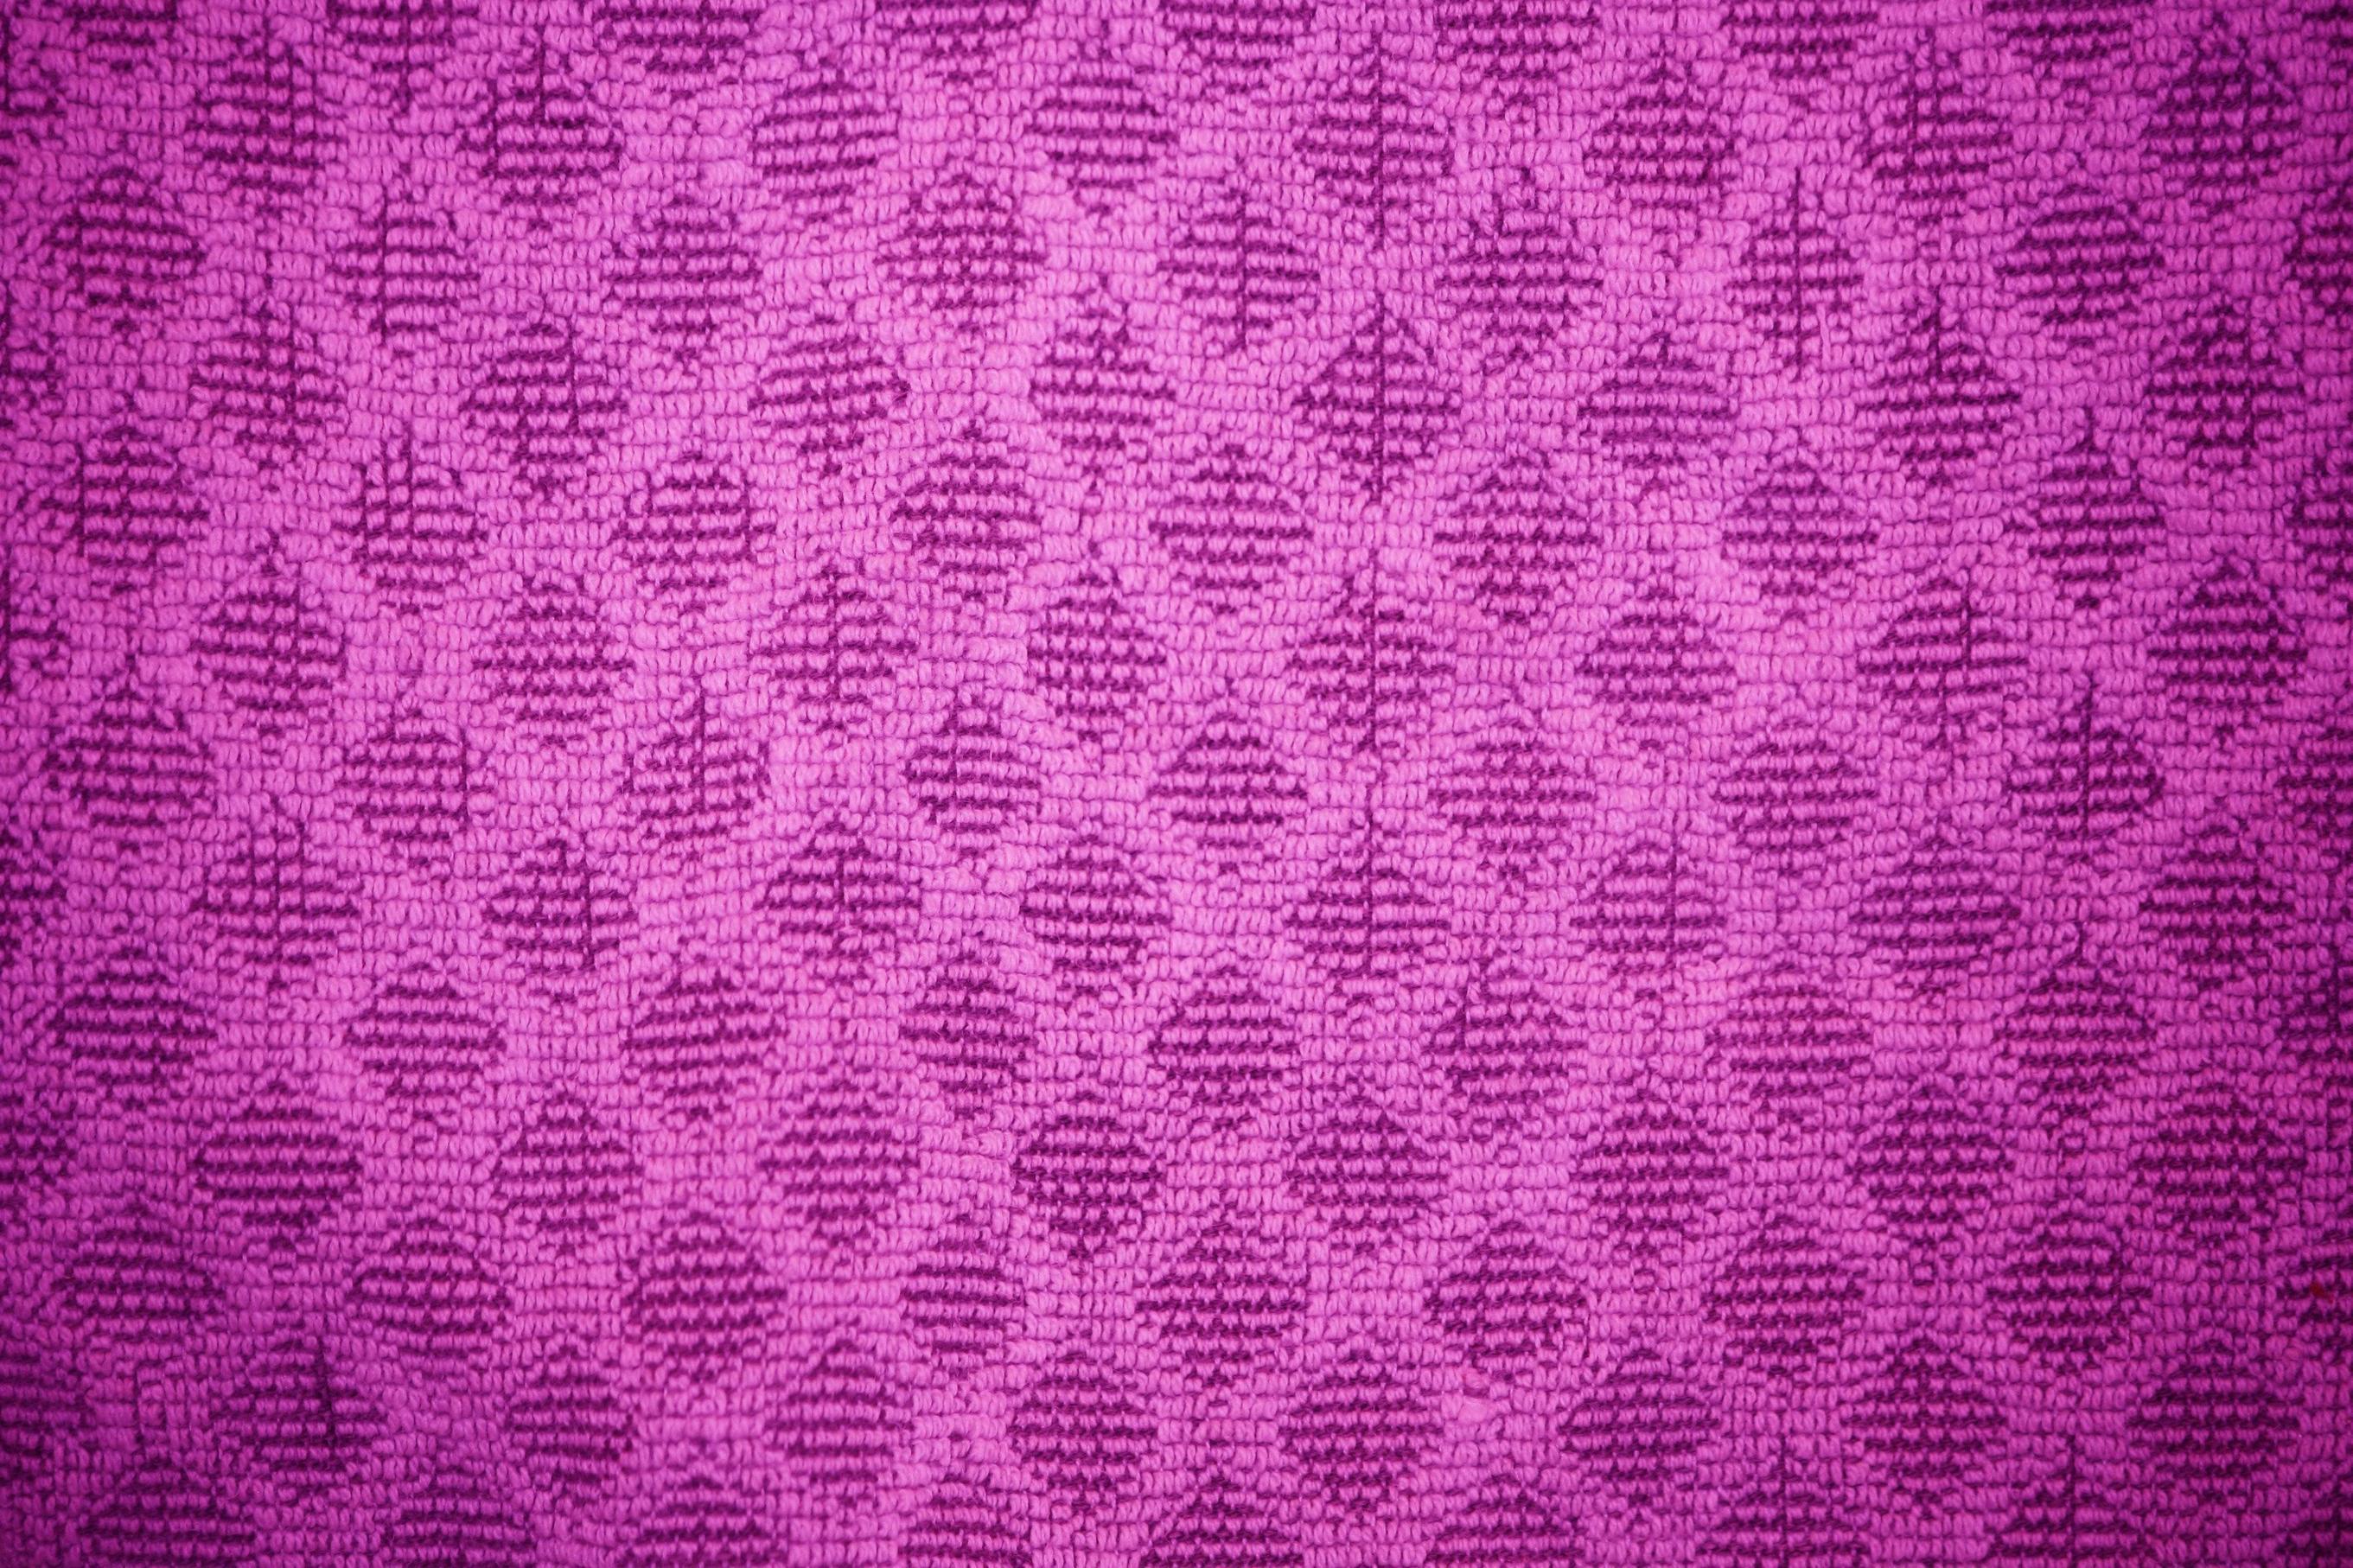 Magenta Dish Towel with Diamond Pattern Texture Picture. Free